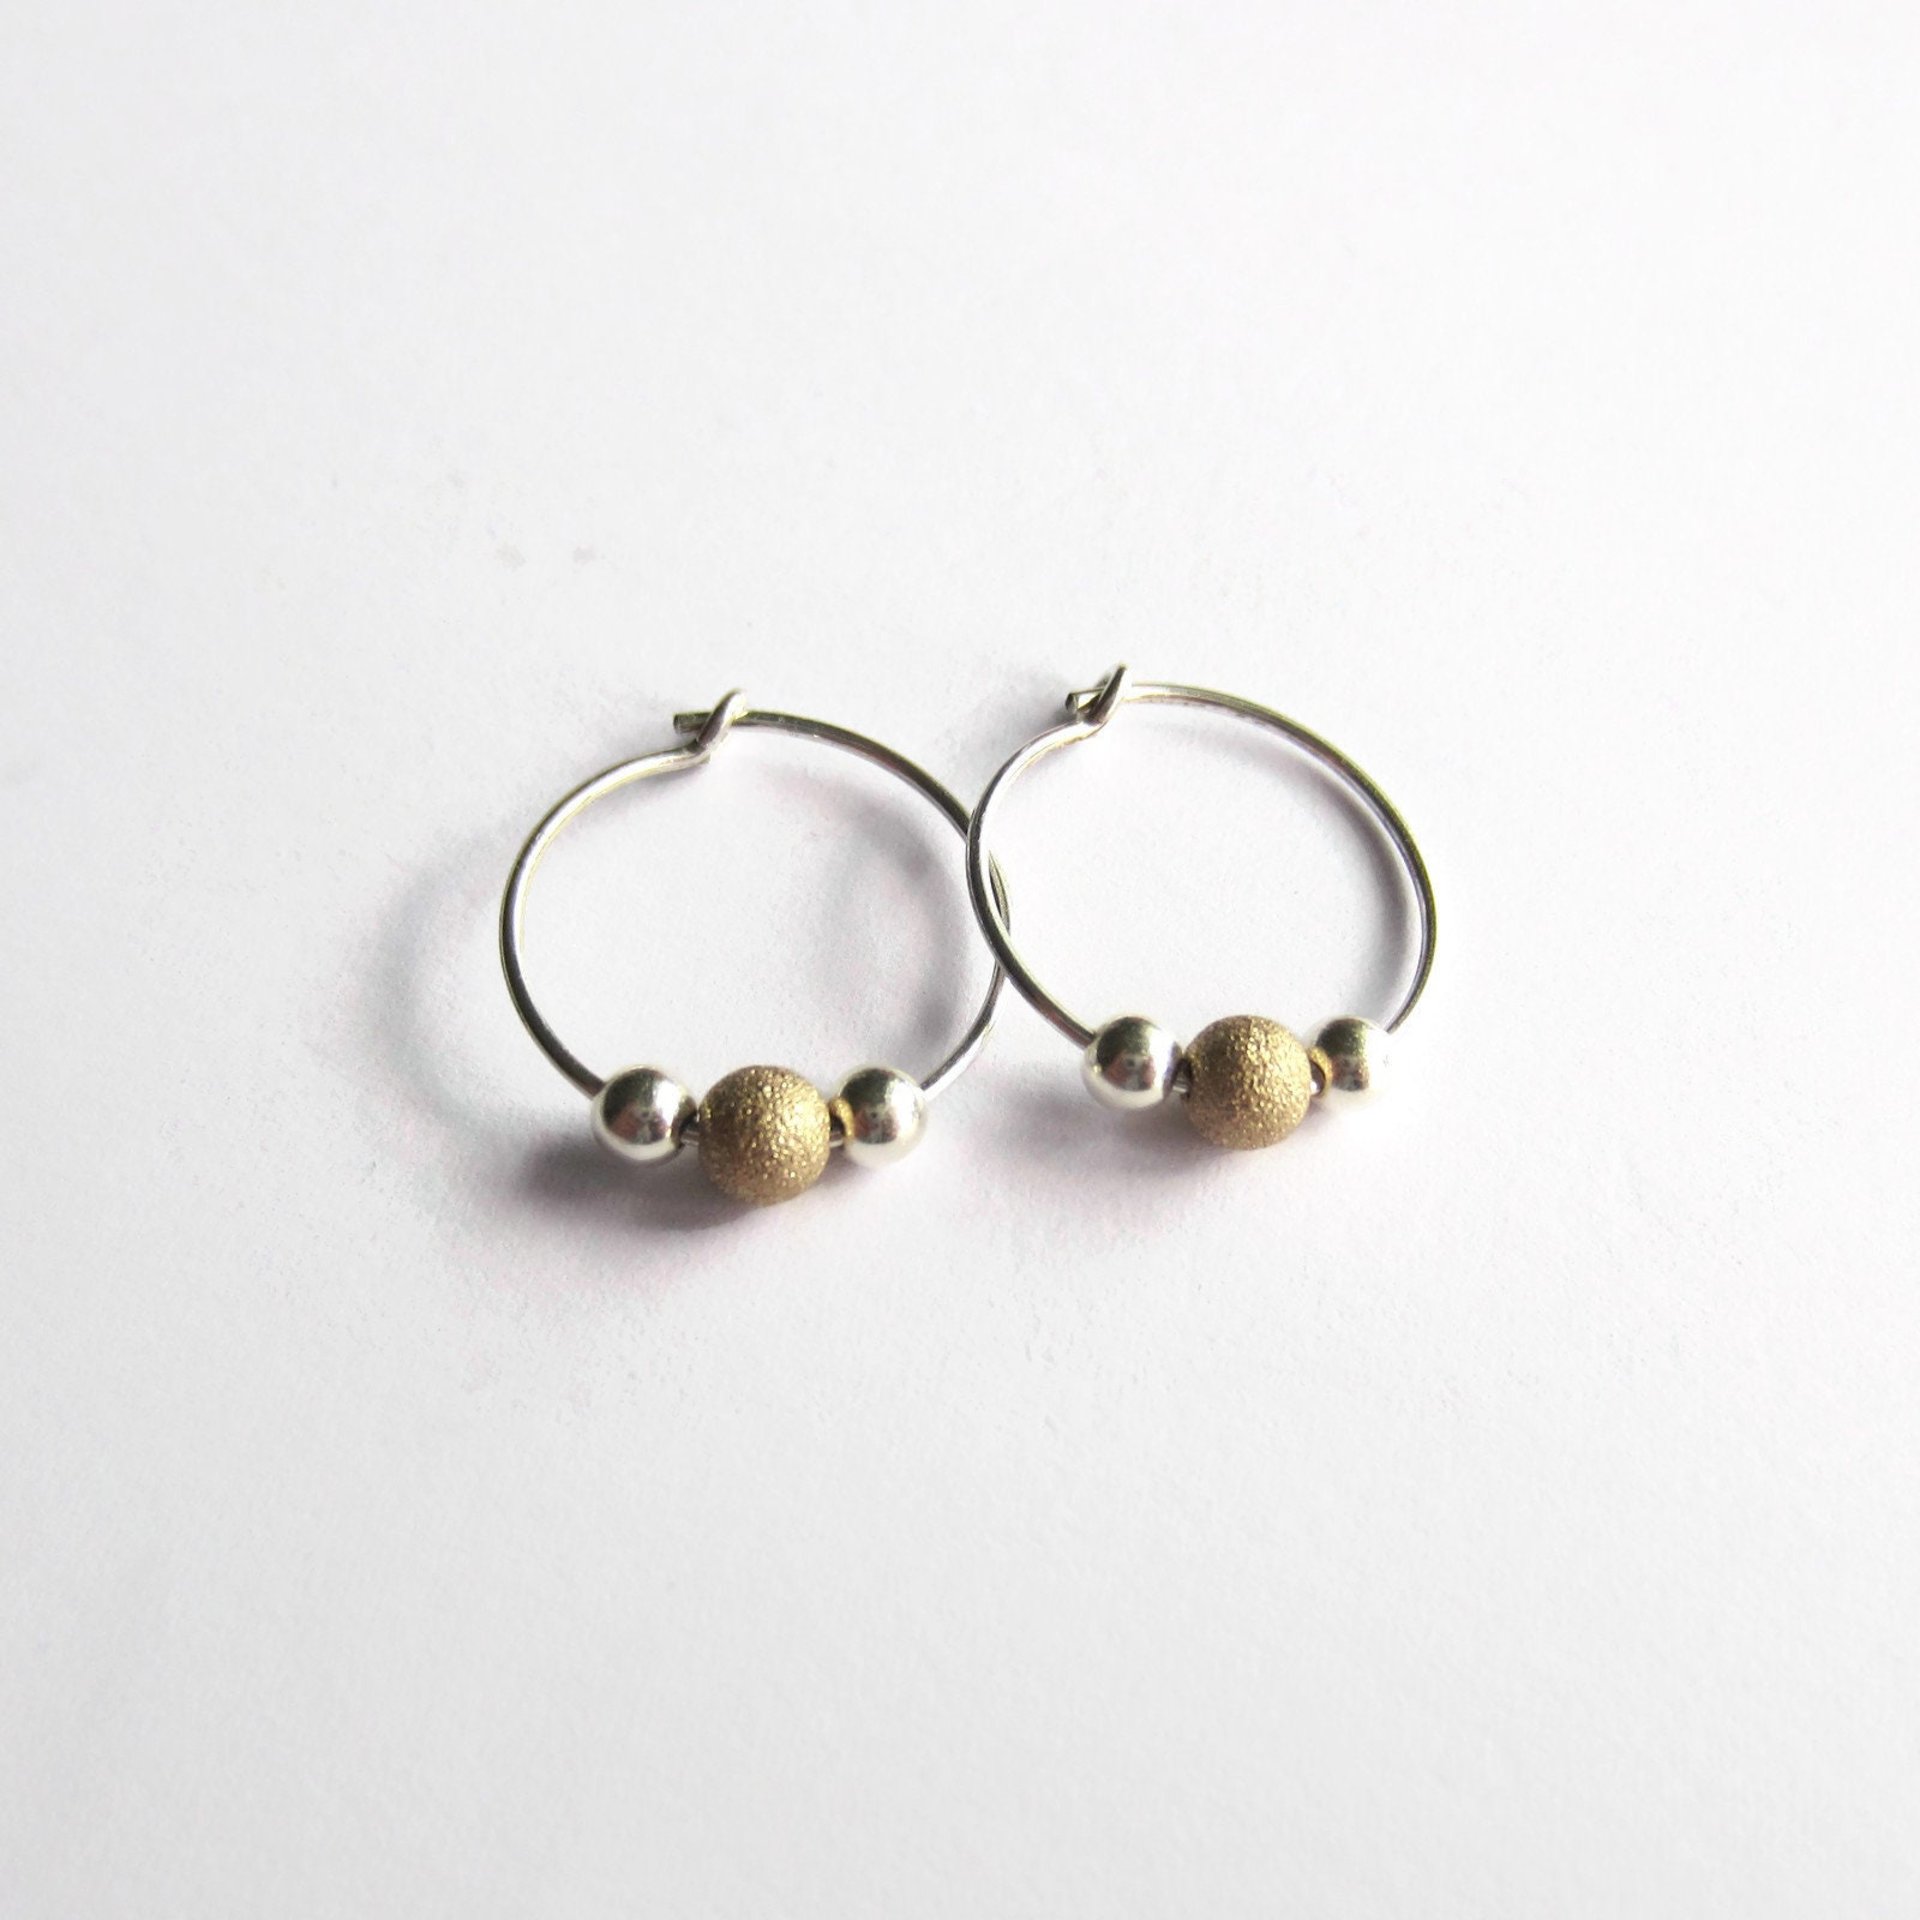 Sterling Silver and Gold Filled Stardust Bead Hoop Earrings ~ Handmade by The Tiny Tree Frog Jewellery